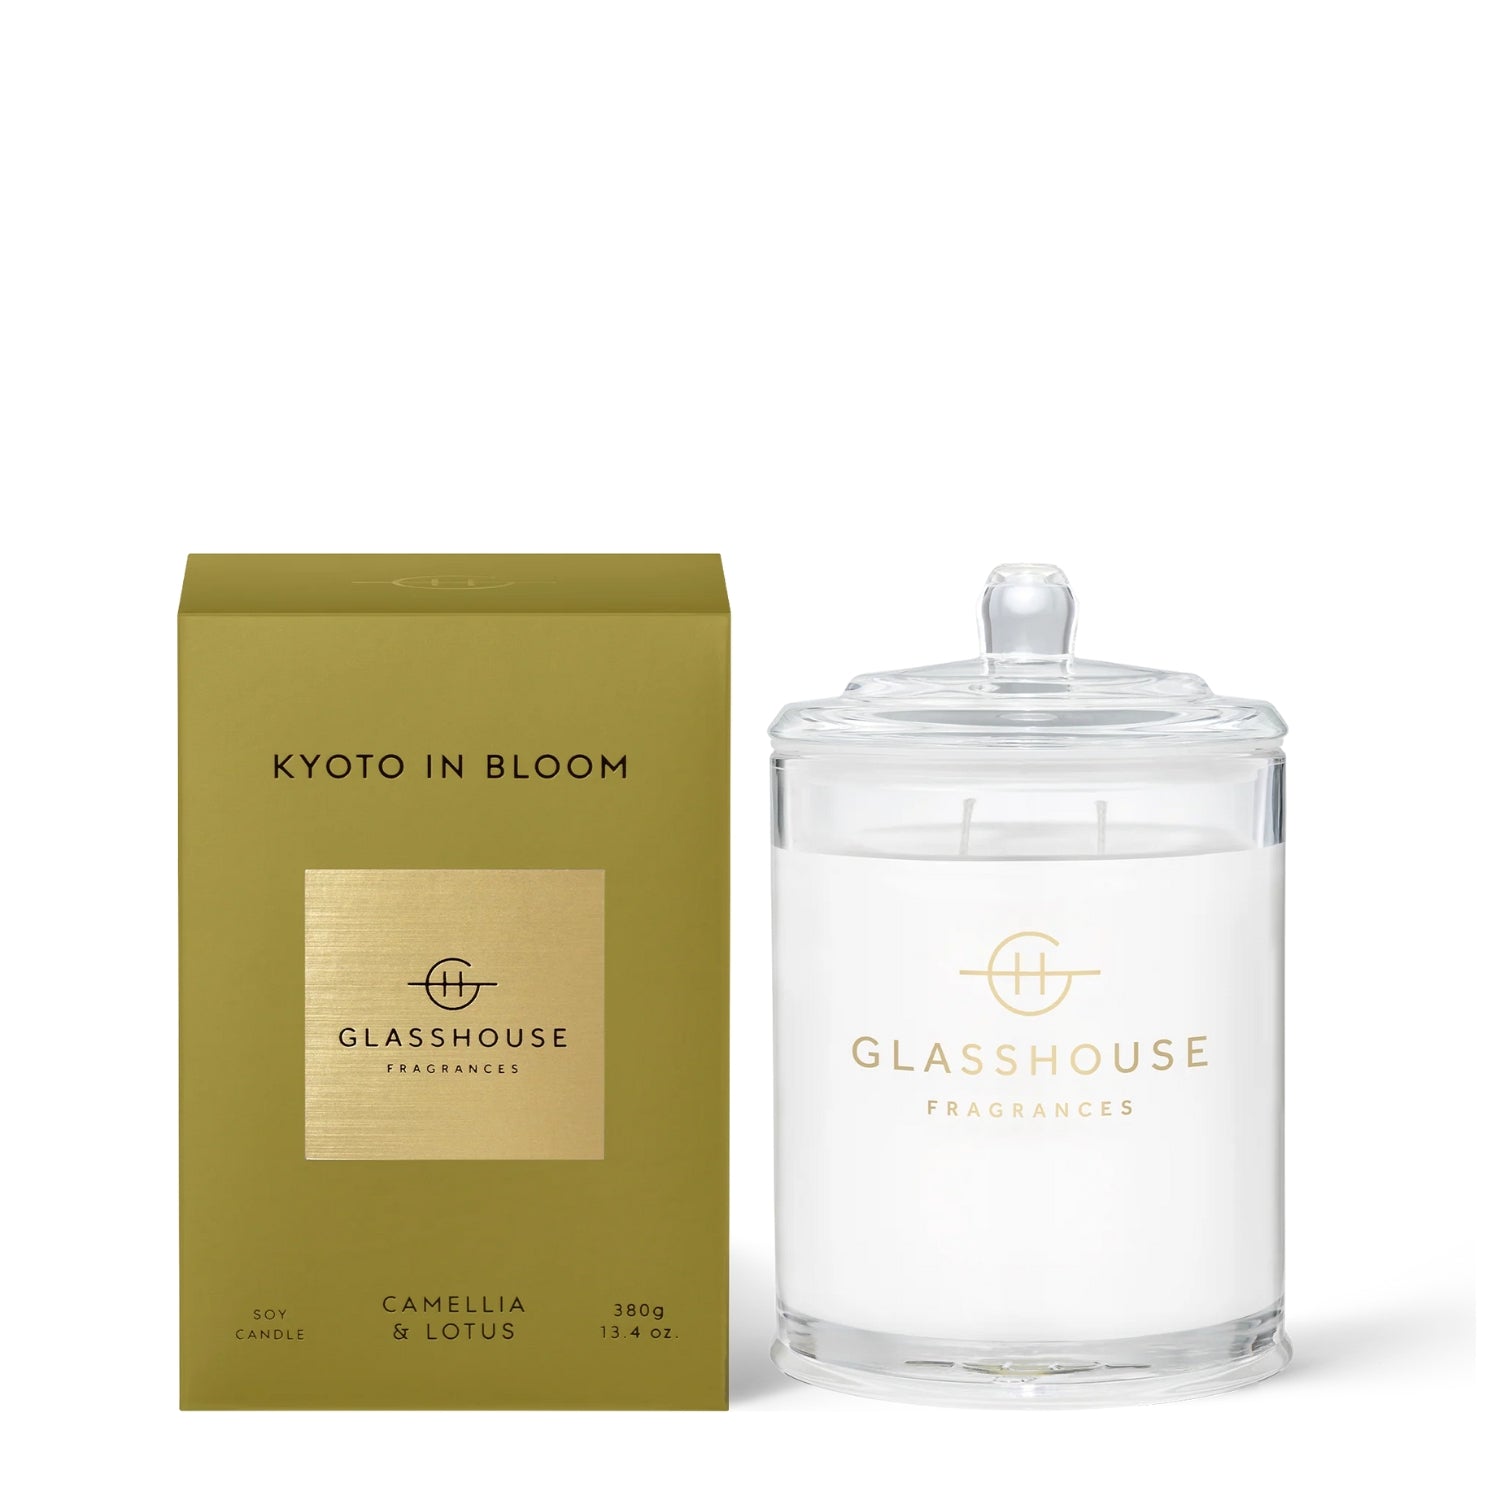 Kyoto in Bloom | 380g Candle